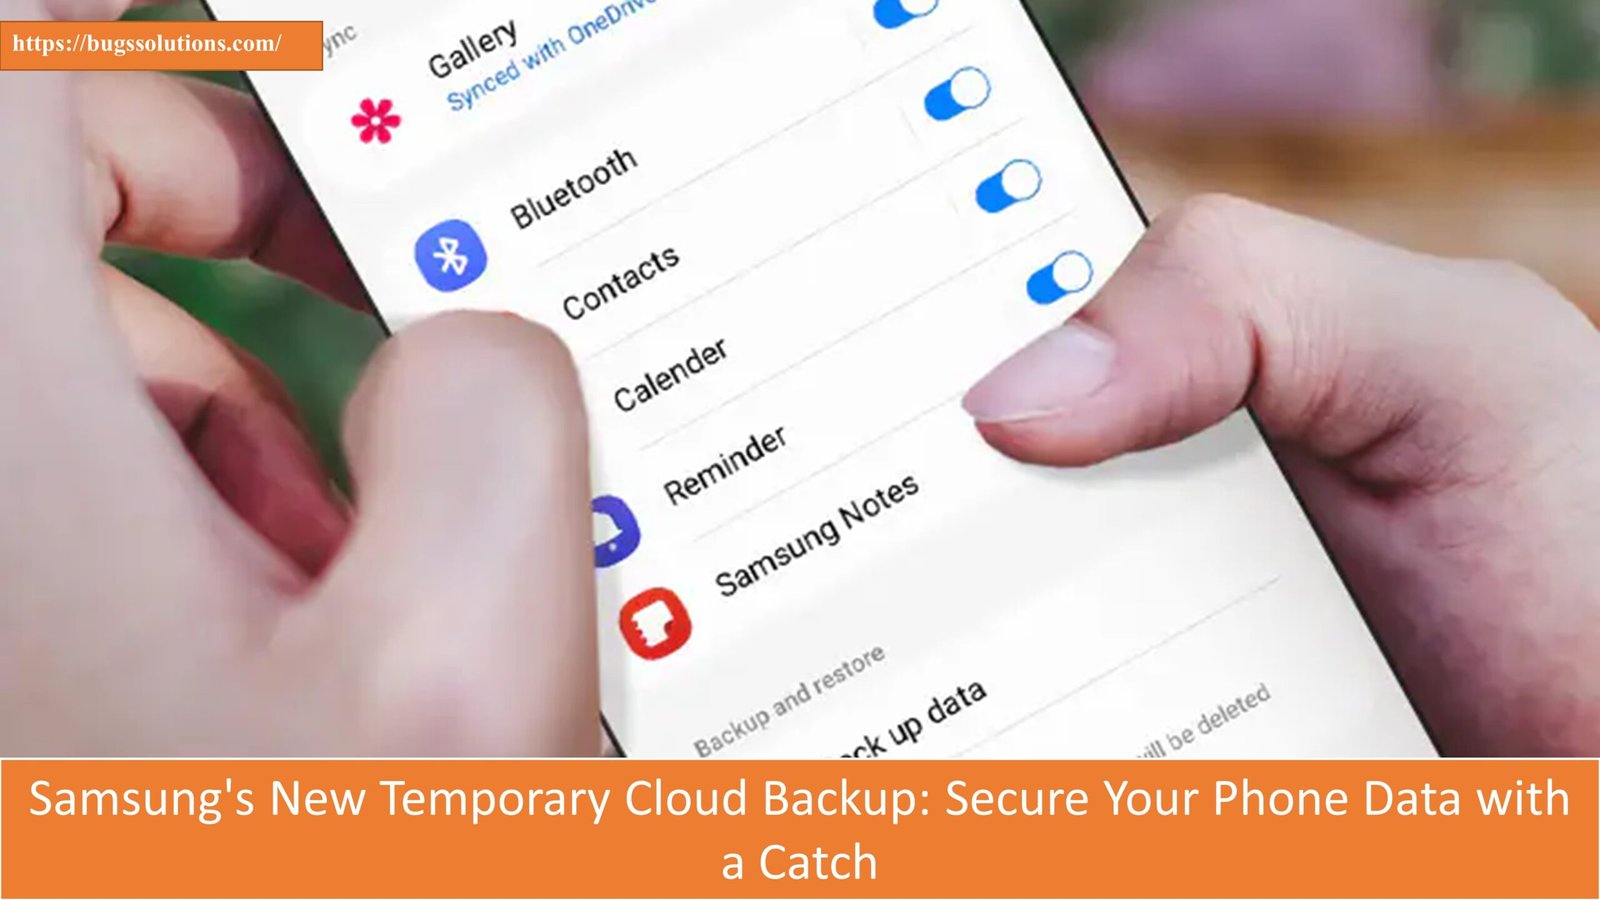 Samsung's New Temporary Cloud Backup: Secure Your Phone Data with a Catch